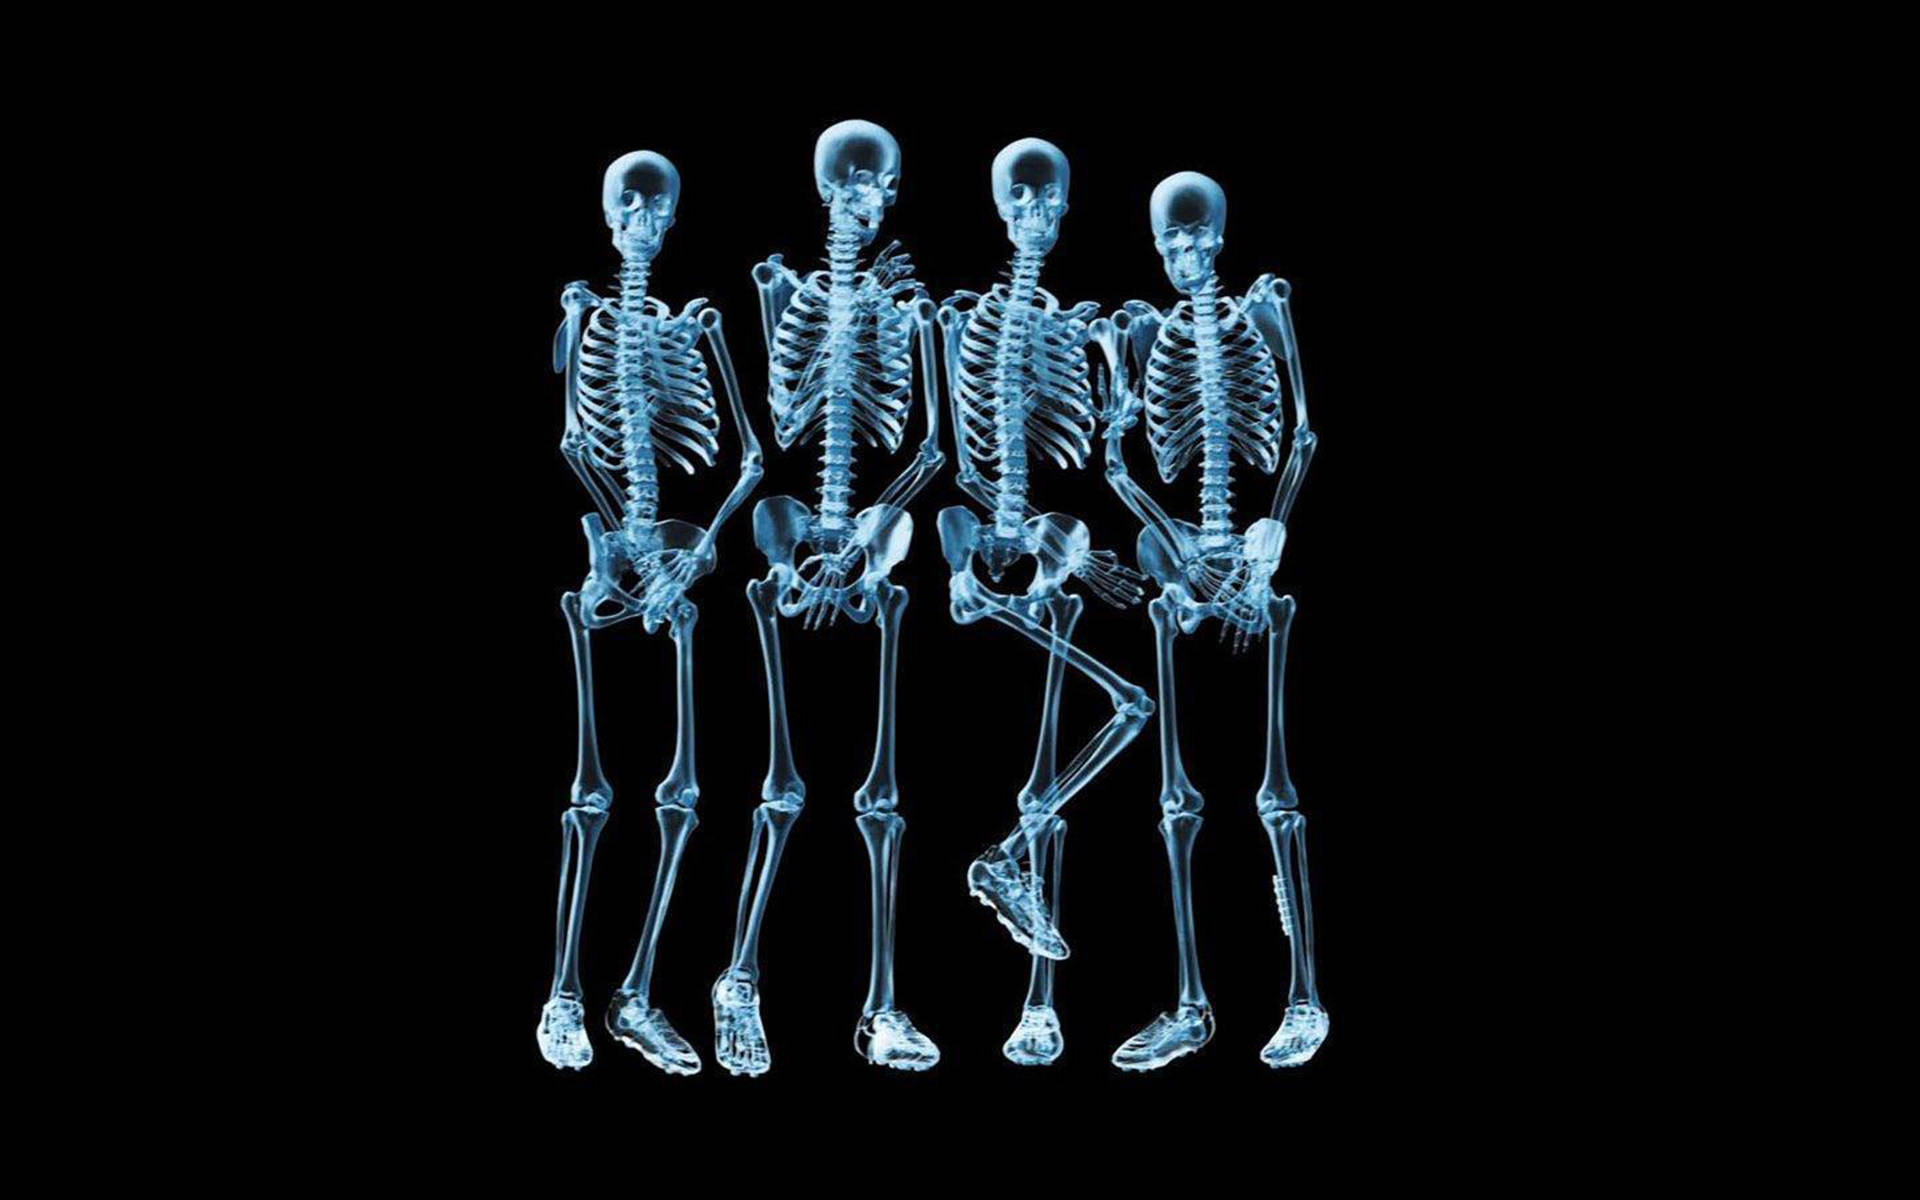 Four Skeletons X-ray